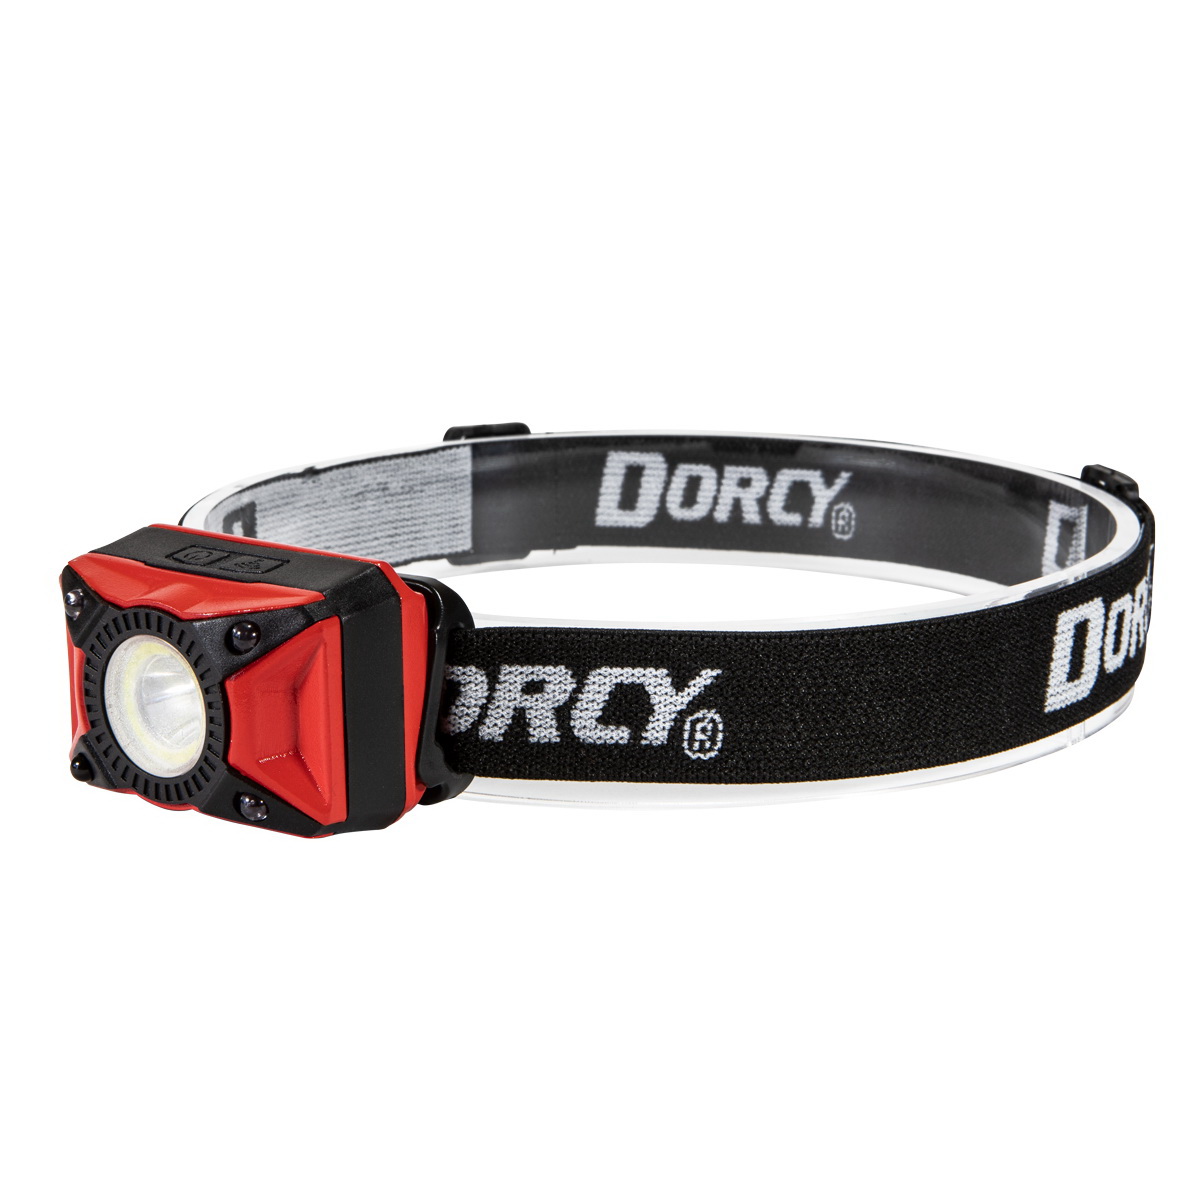 Ultra HD 41-4337 Rechargeable Headlamp, 1200 mAh, Lithium-Ion Battery, LED Lamp, 650 Lumens, Flood, Spot Beam, Red